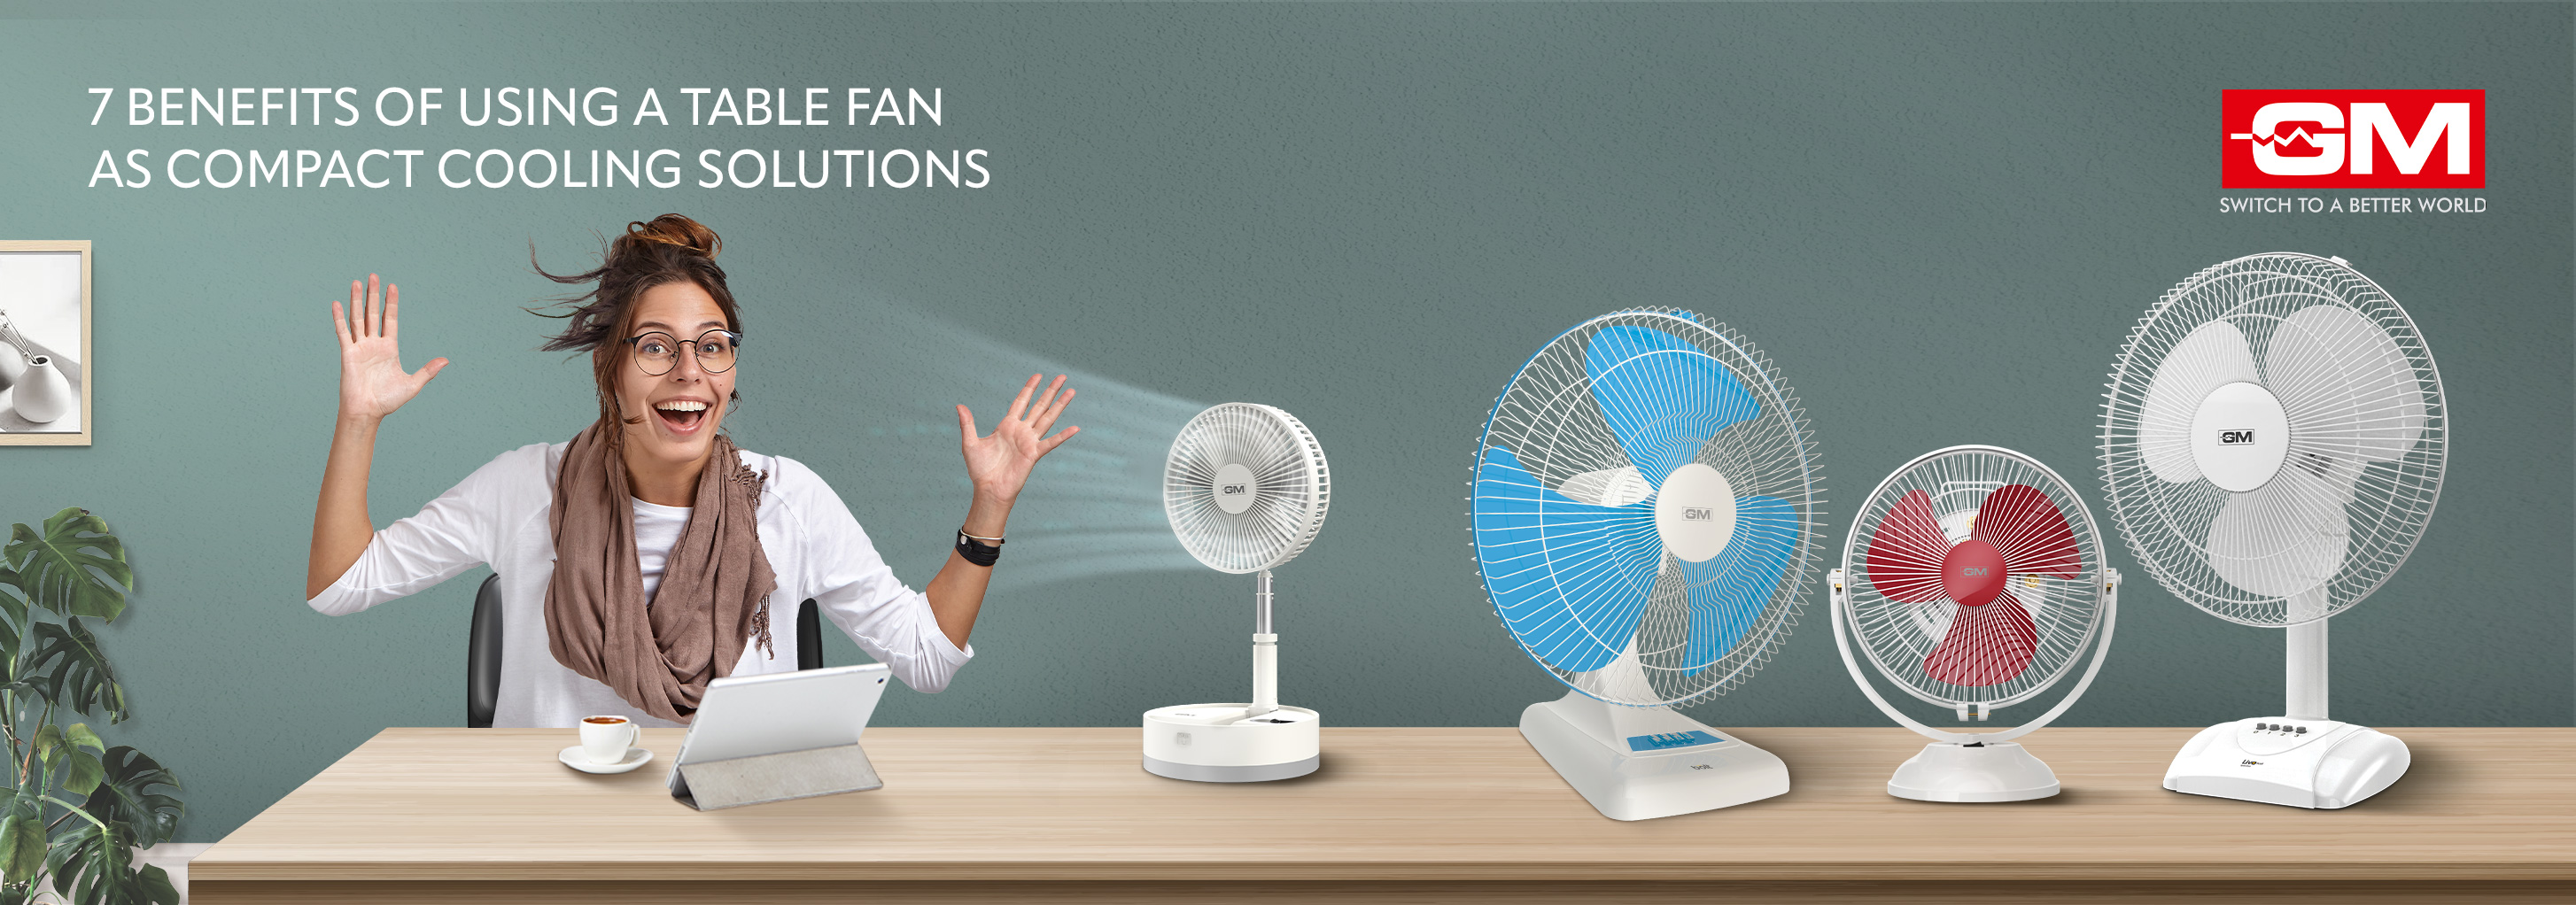 7 Benefits of Using a Table Fan for Compact Cooling Solutions